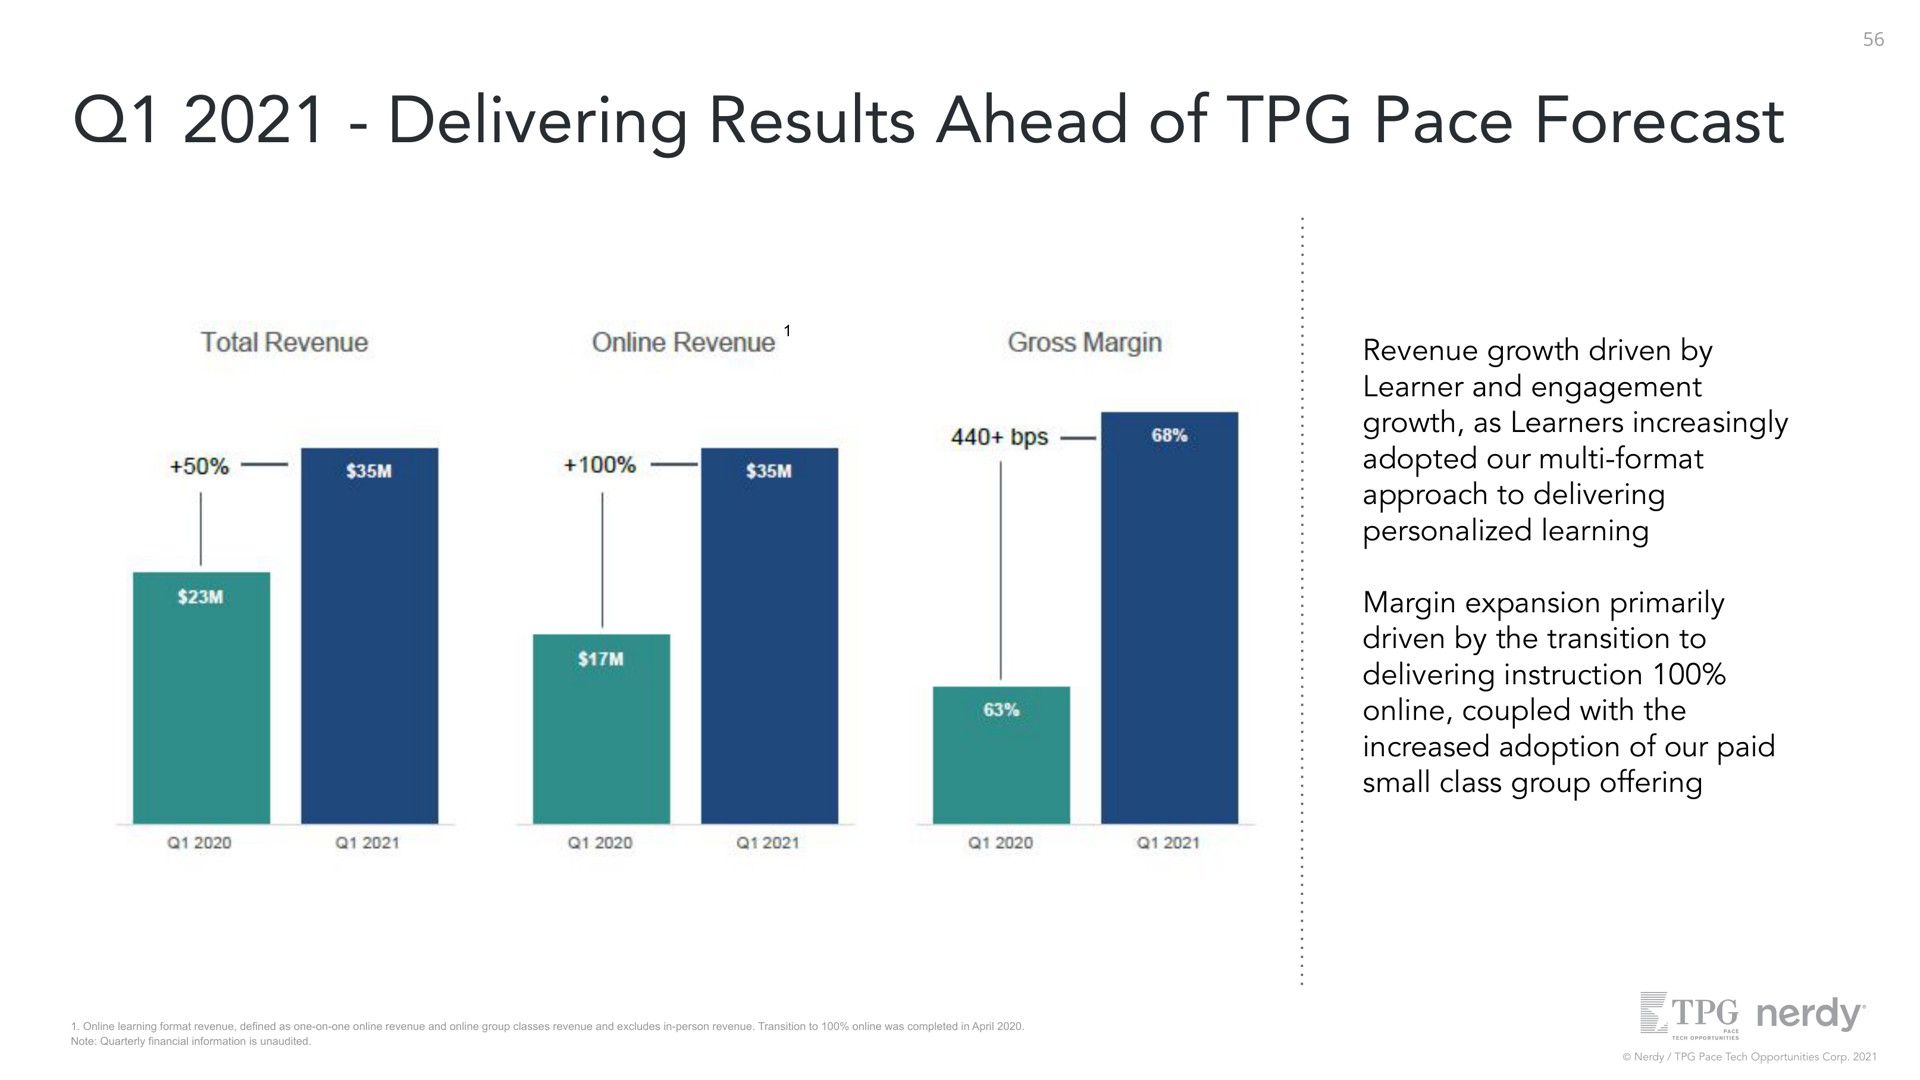 delivering results ahead of pace forecast revenue growth driven by learner and engagement growth as learners increasingly adopted our format approach to delivering personalized learning margin expansion primarily driven by the transition to delivering instruction coupled with the increased adoption of our paid small class group offering | Nerdy